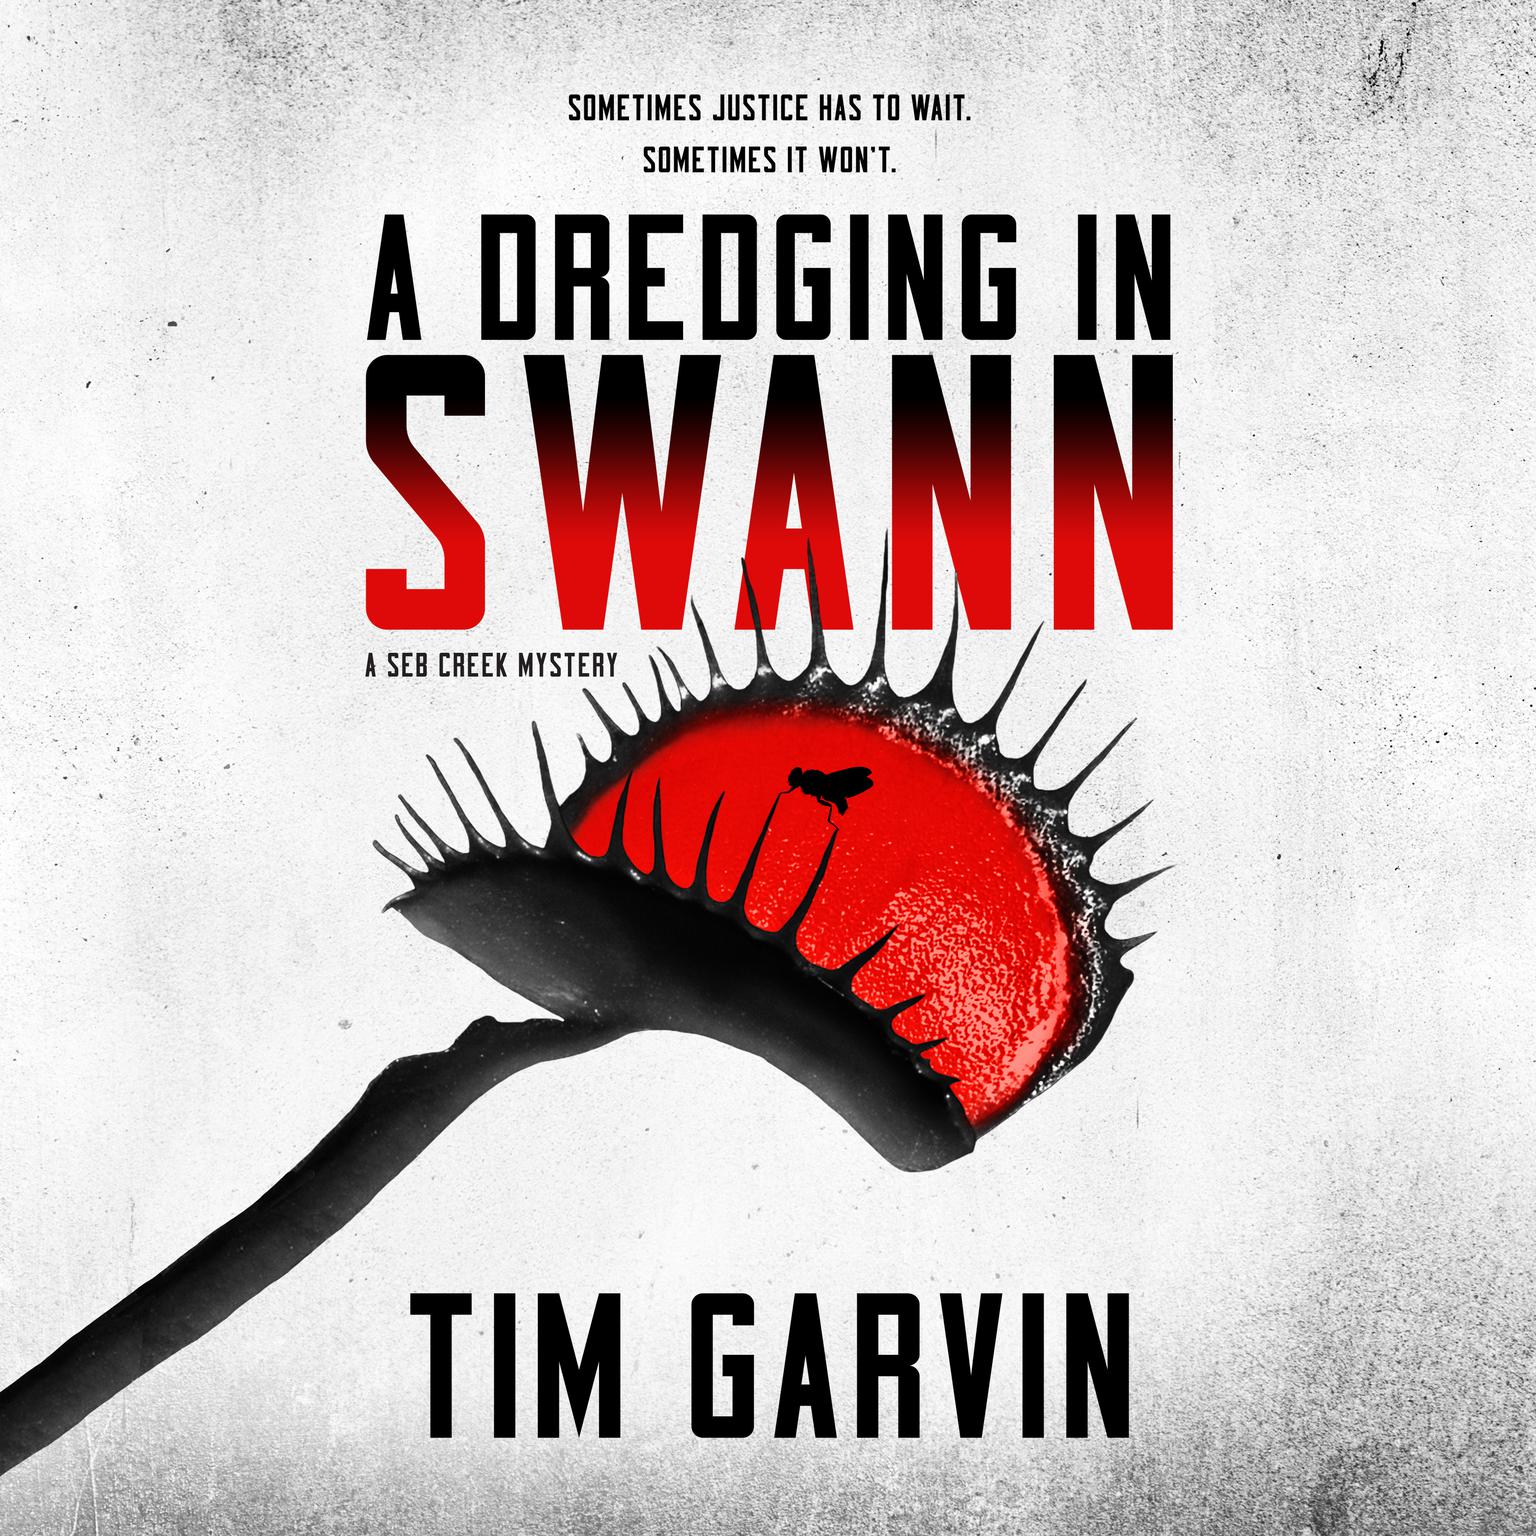 A Dredging in Swann: A Seb Creek Mystery Audiobook, by Tim Garvin